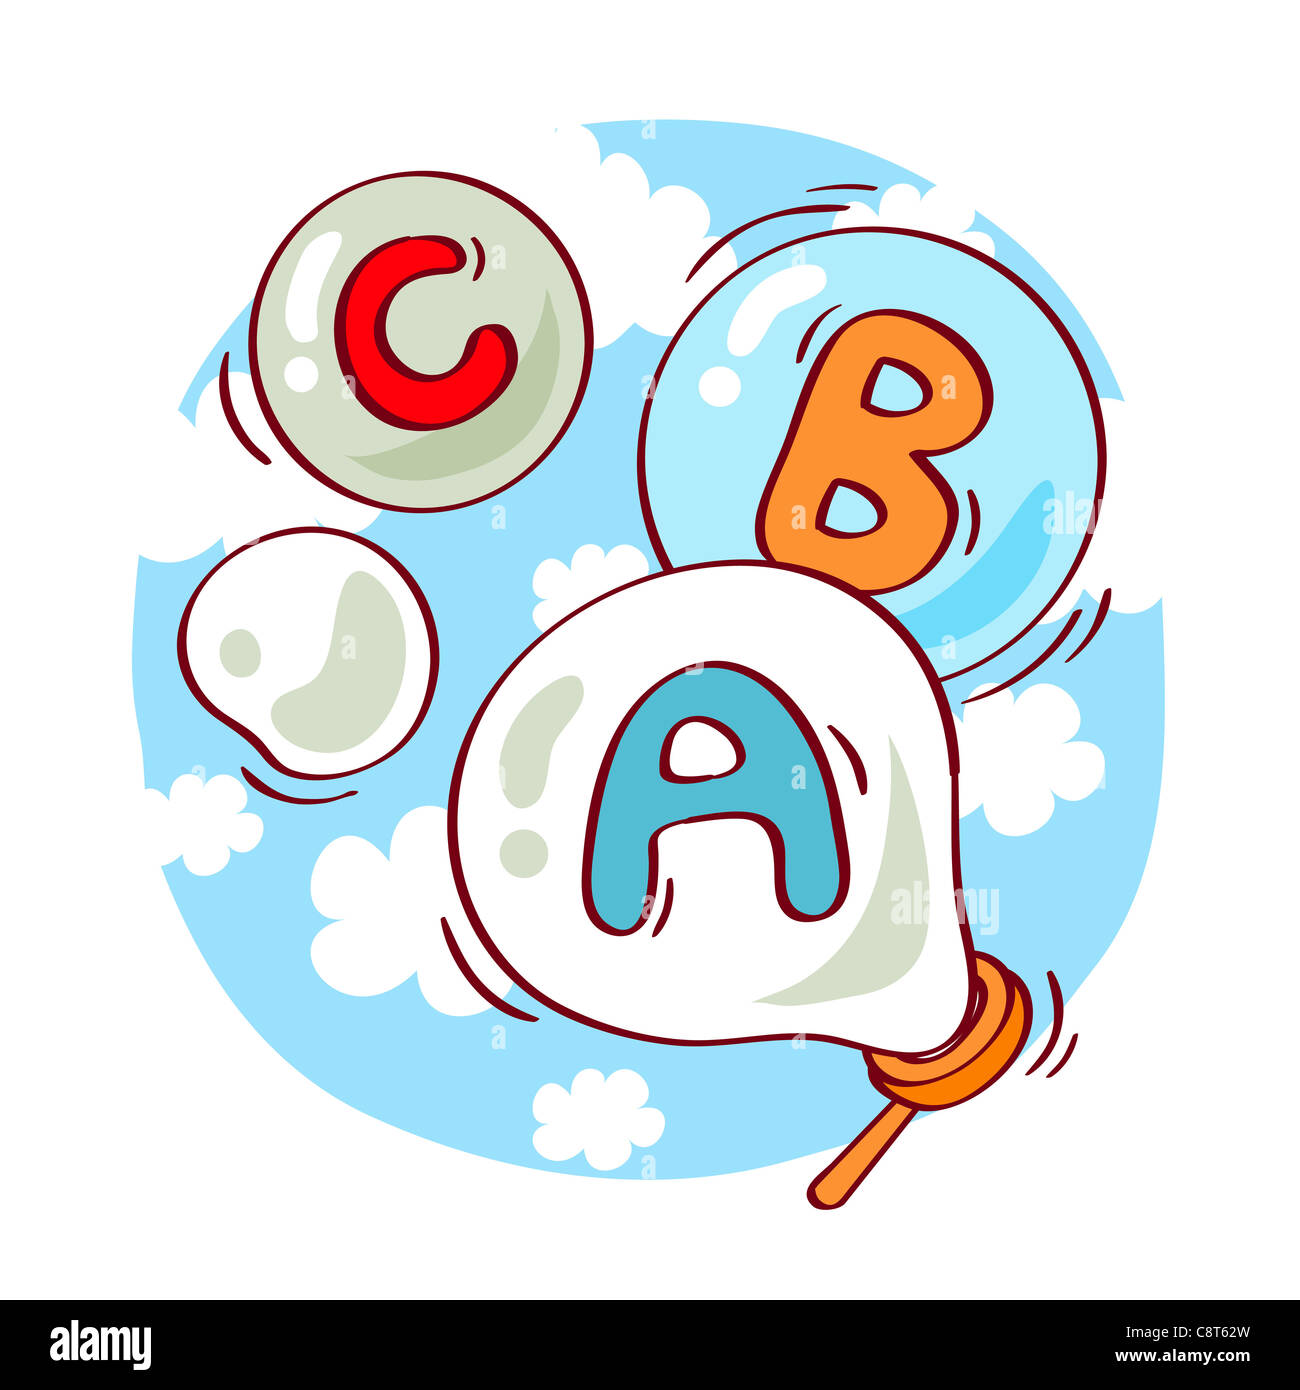 Illustration of alphabets in bubbles Stock Photo